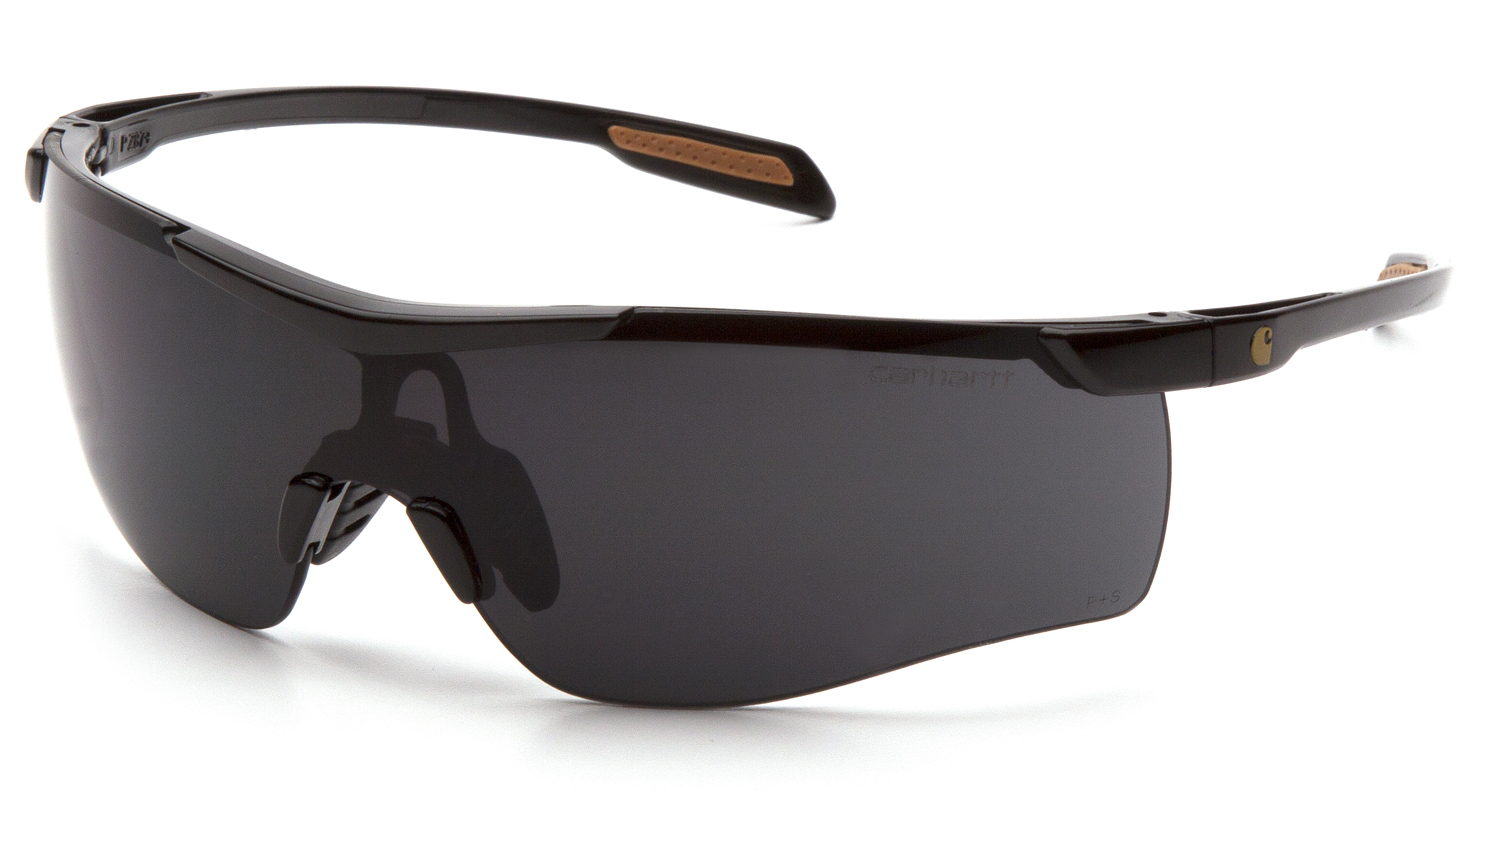 NEW PRODUCT: Carhartt Cayce and Ironside Safety Glasses